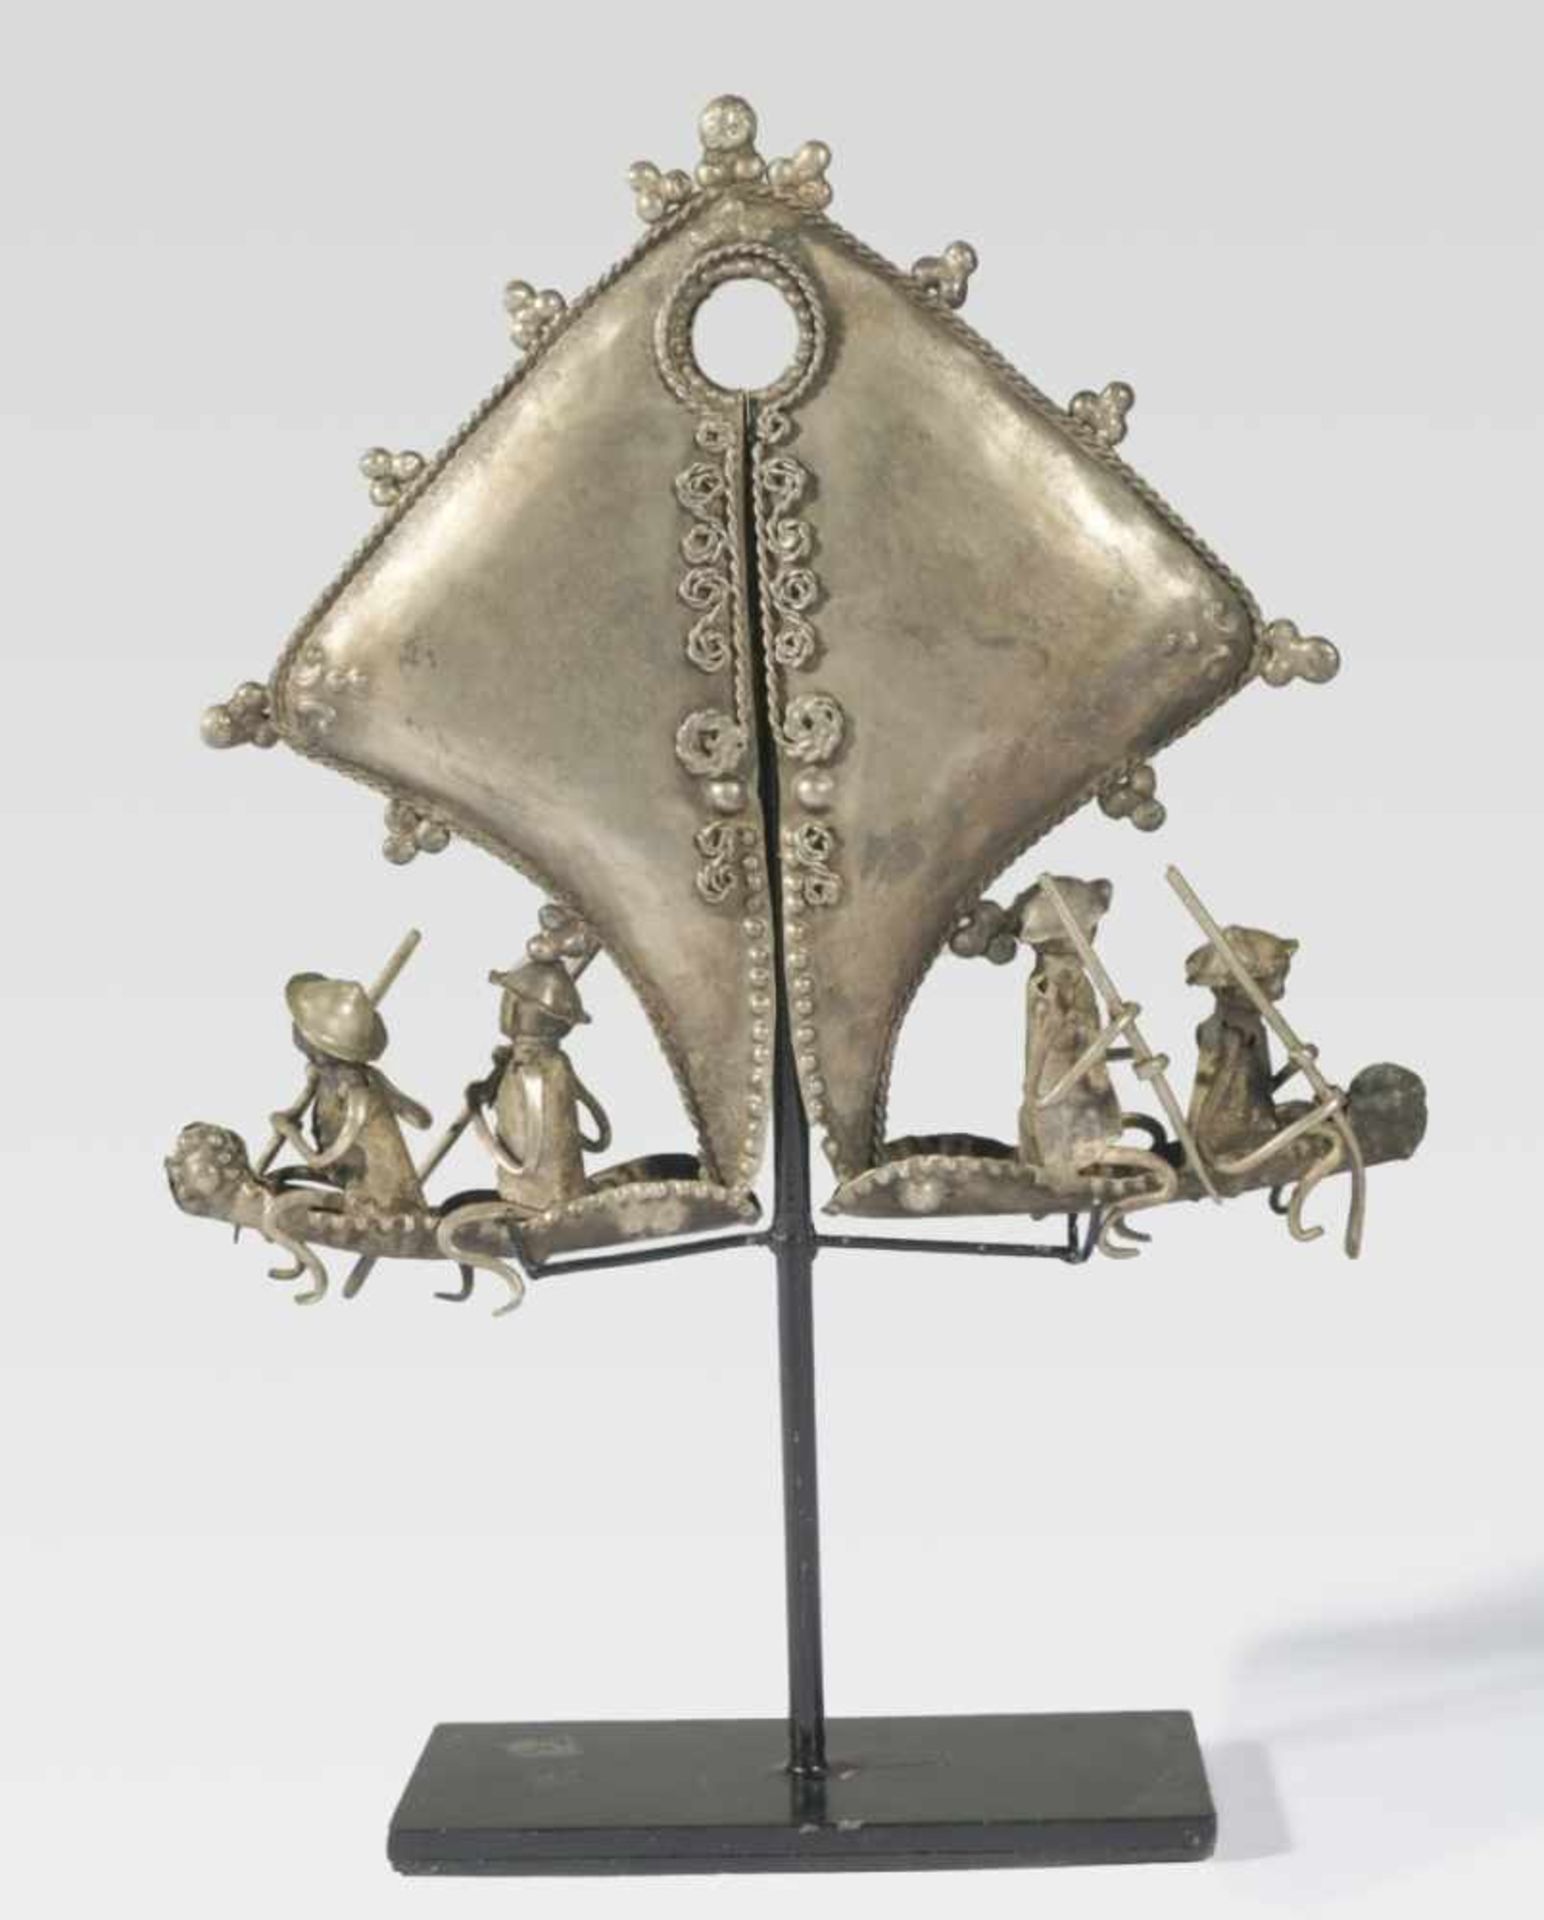 Very large Mamuli Earring, Indonesia, Sumba, Silver alloy, probably around 1960, 14 cm